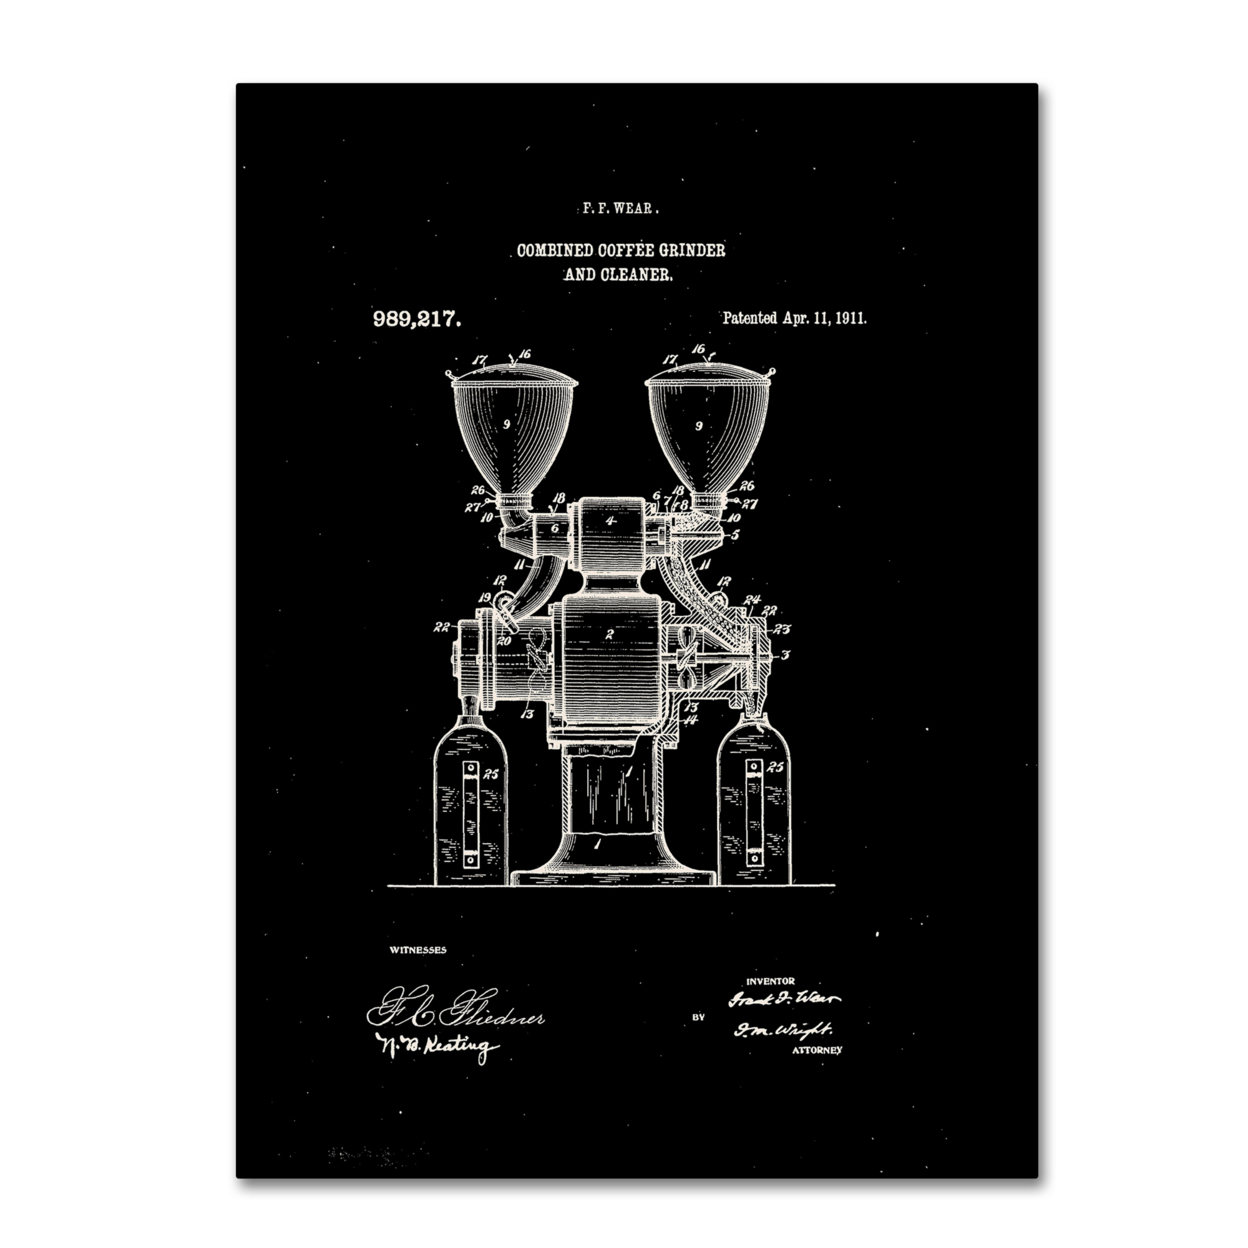 Trademark Global Claire Doherty Coffee Grinder Patent 1911 Black Canvas Wall Art 35 x 47 Inches